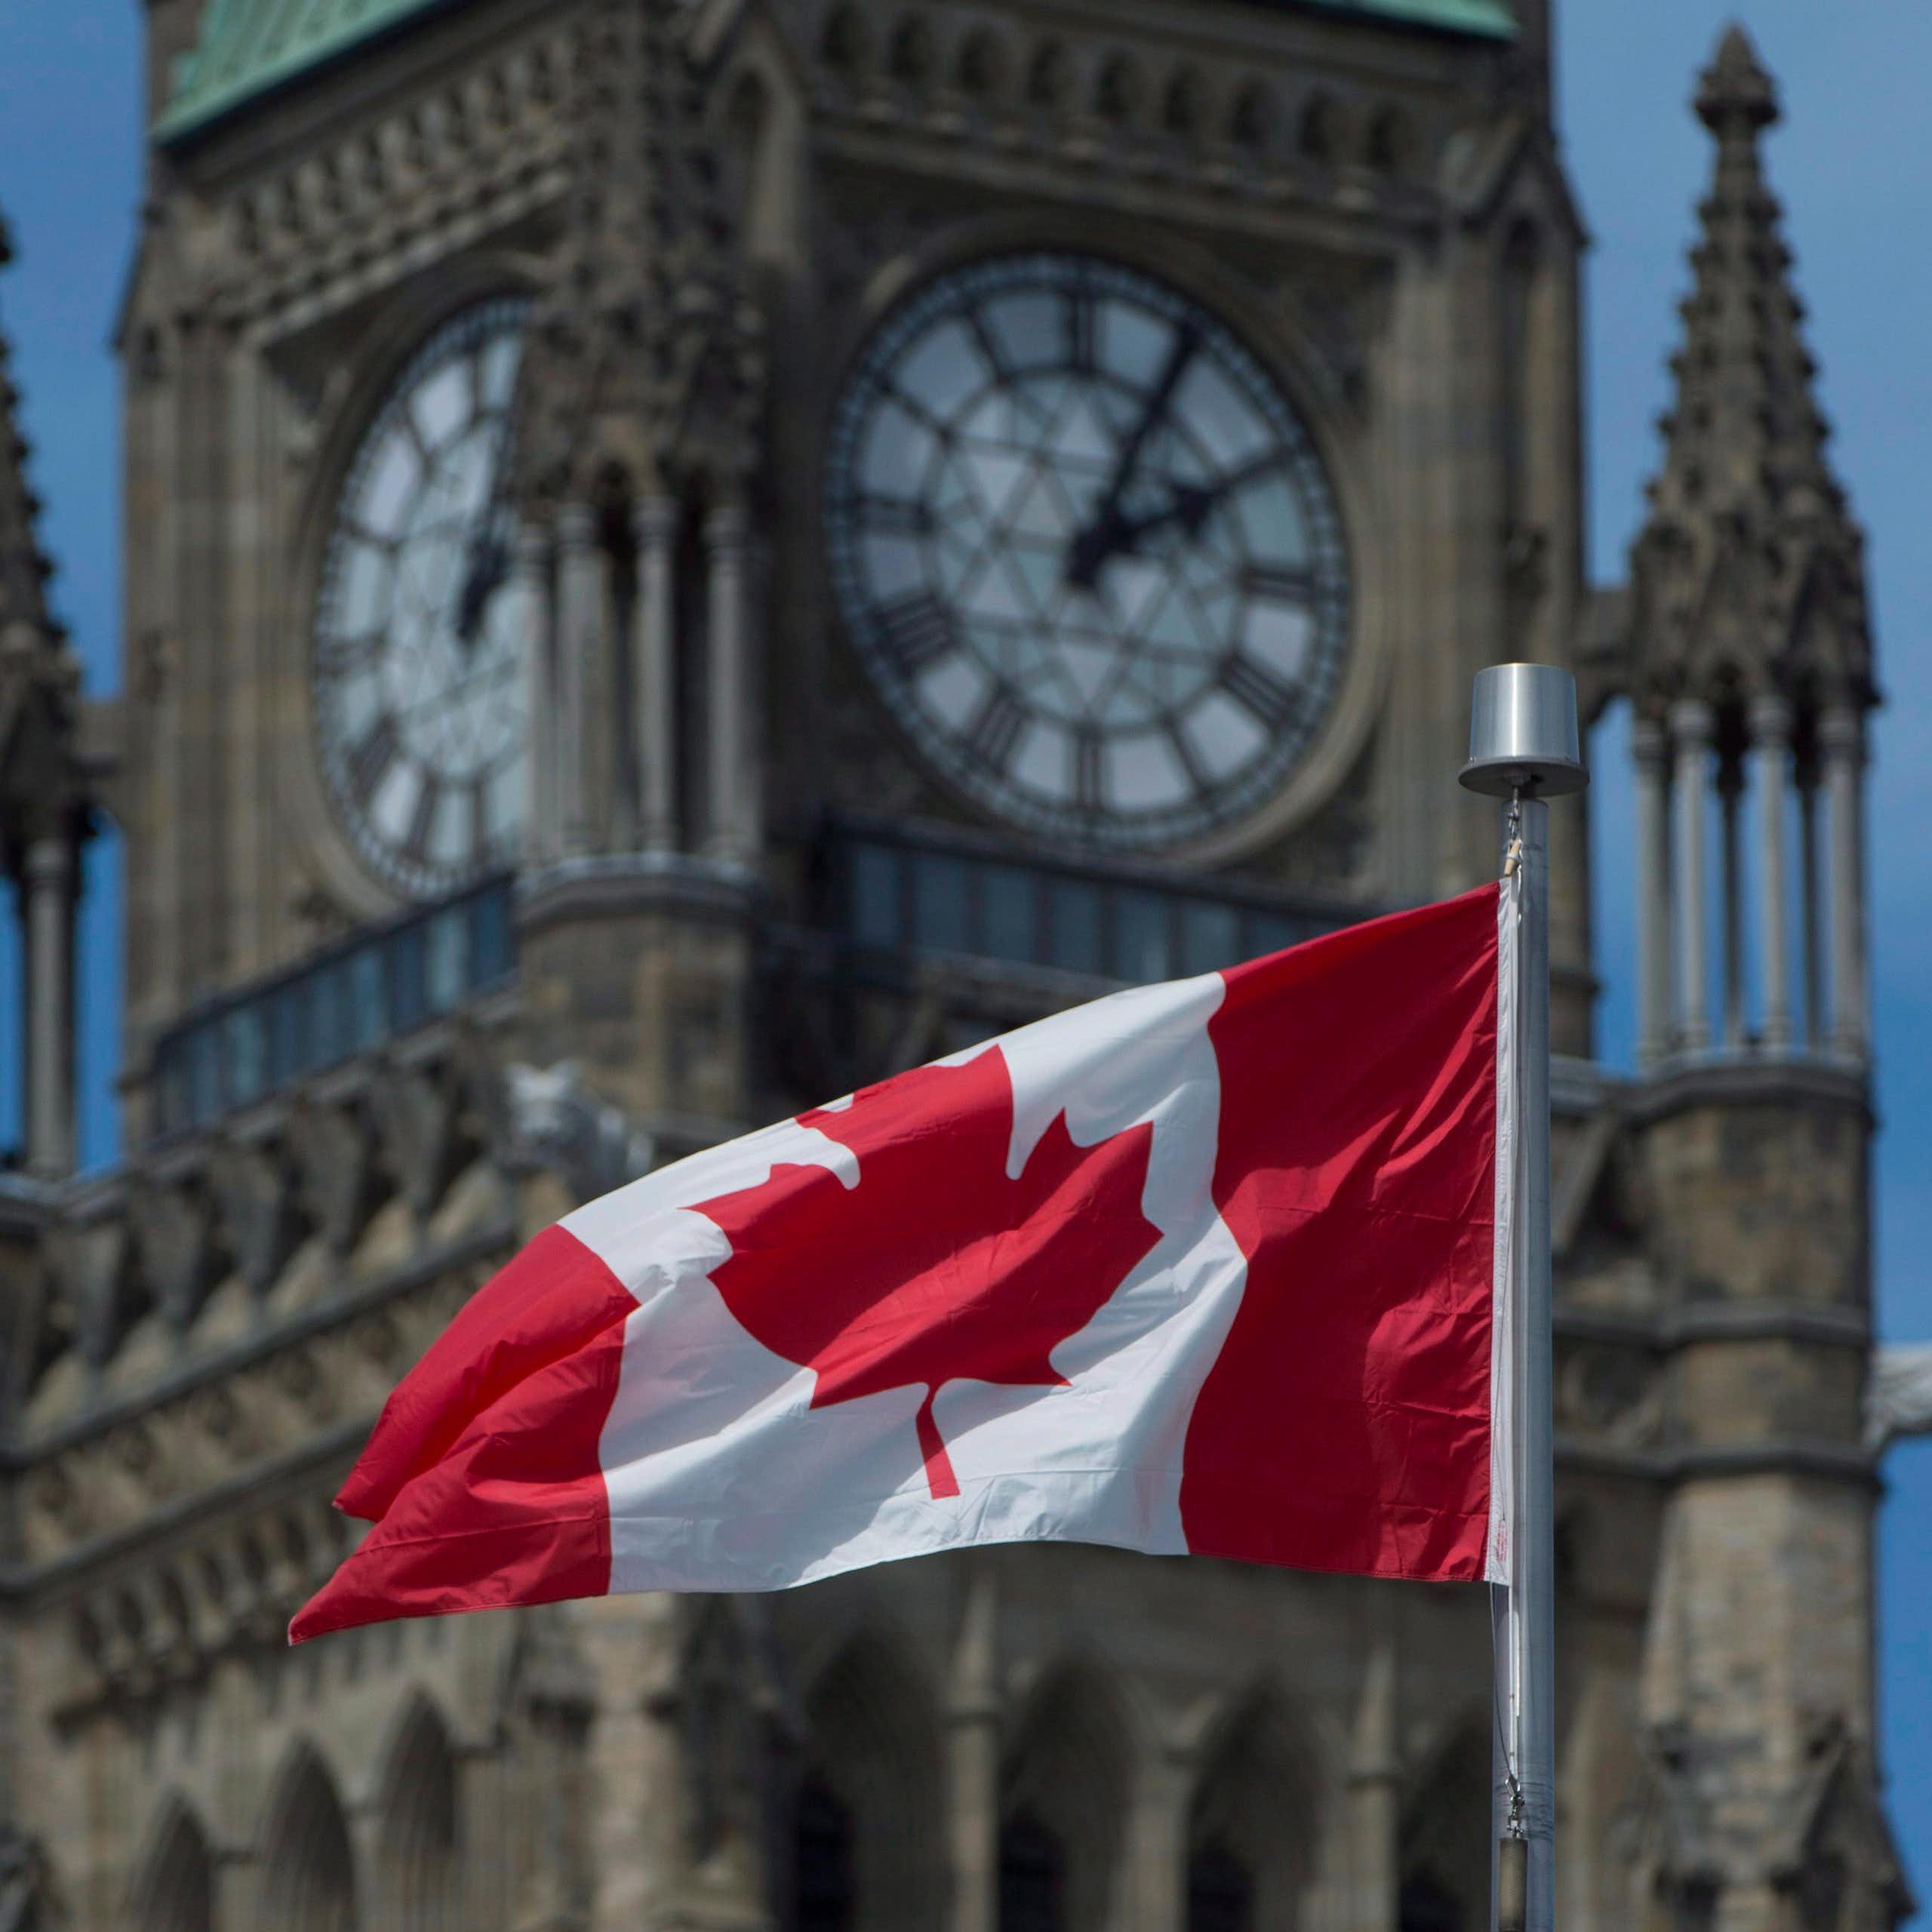 A Canadian flag flying in front of an old-fashioned clock tower